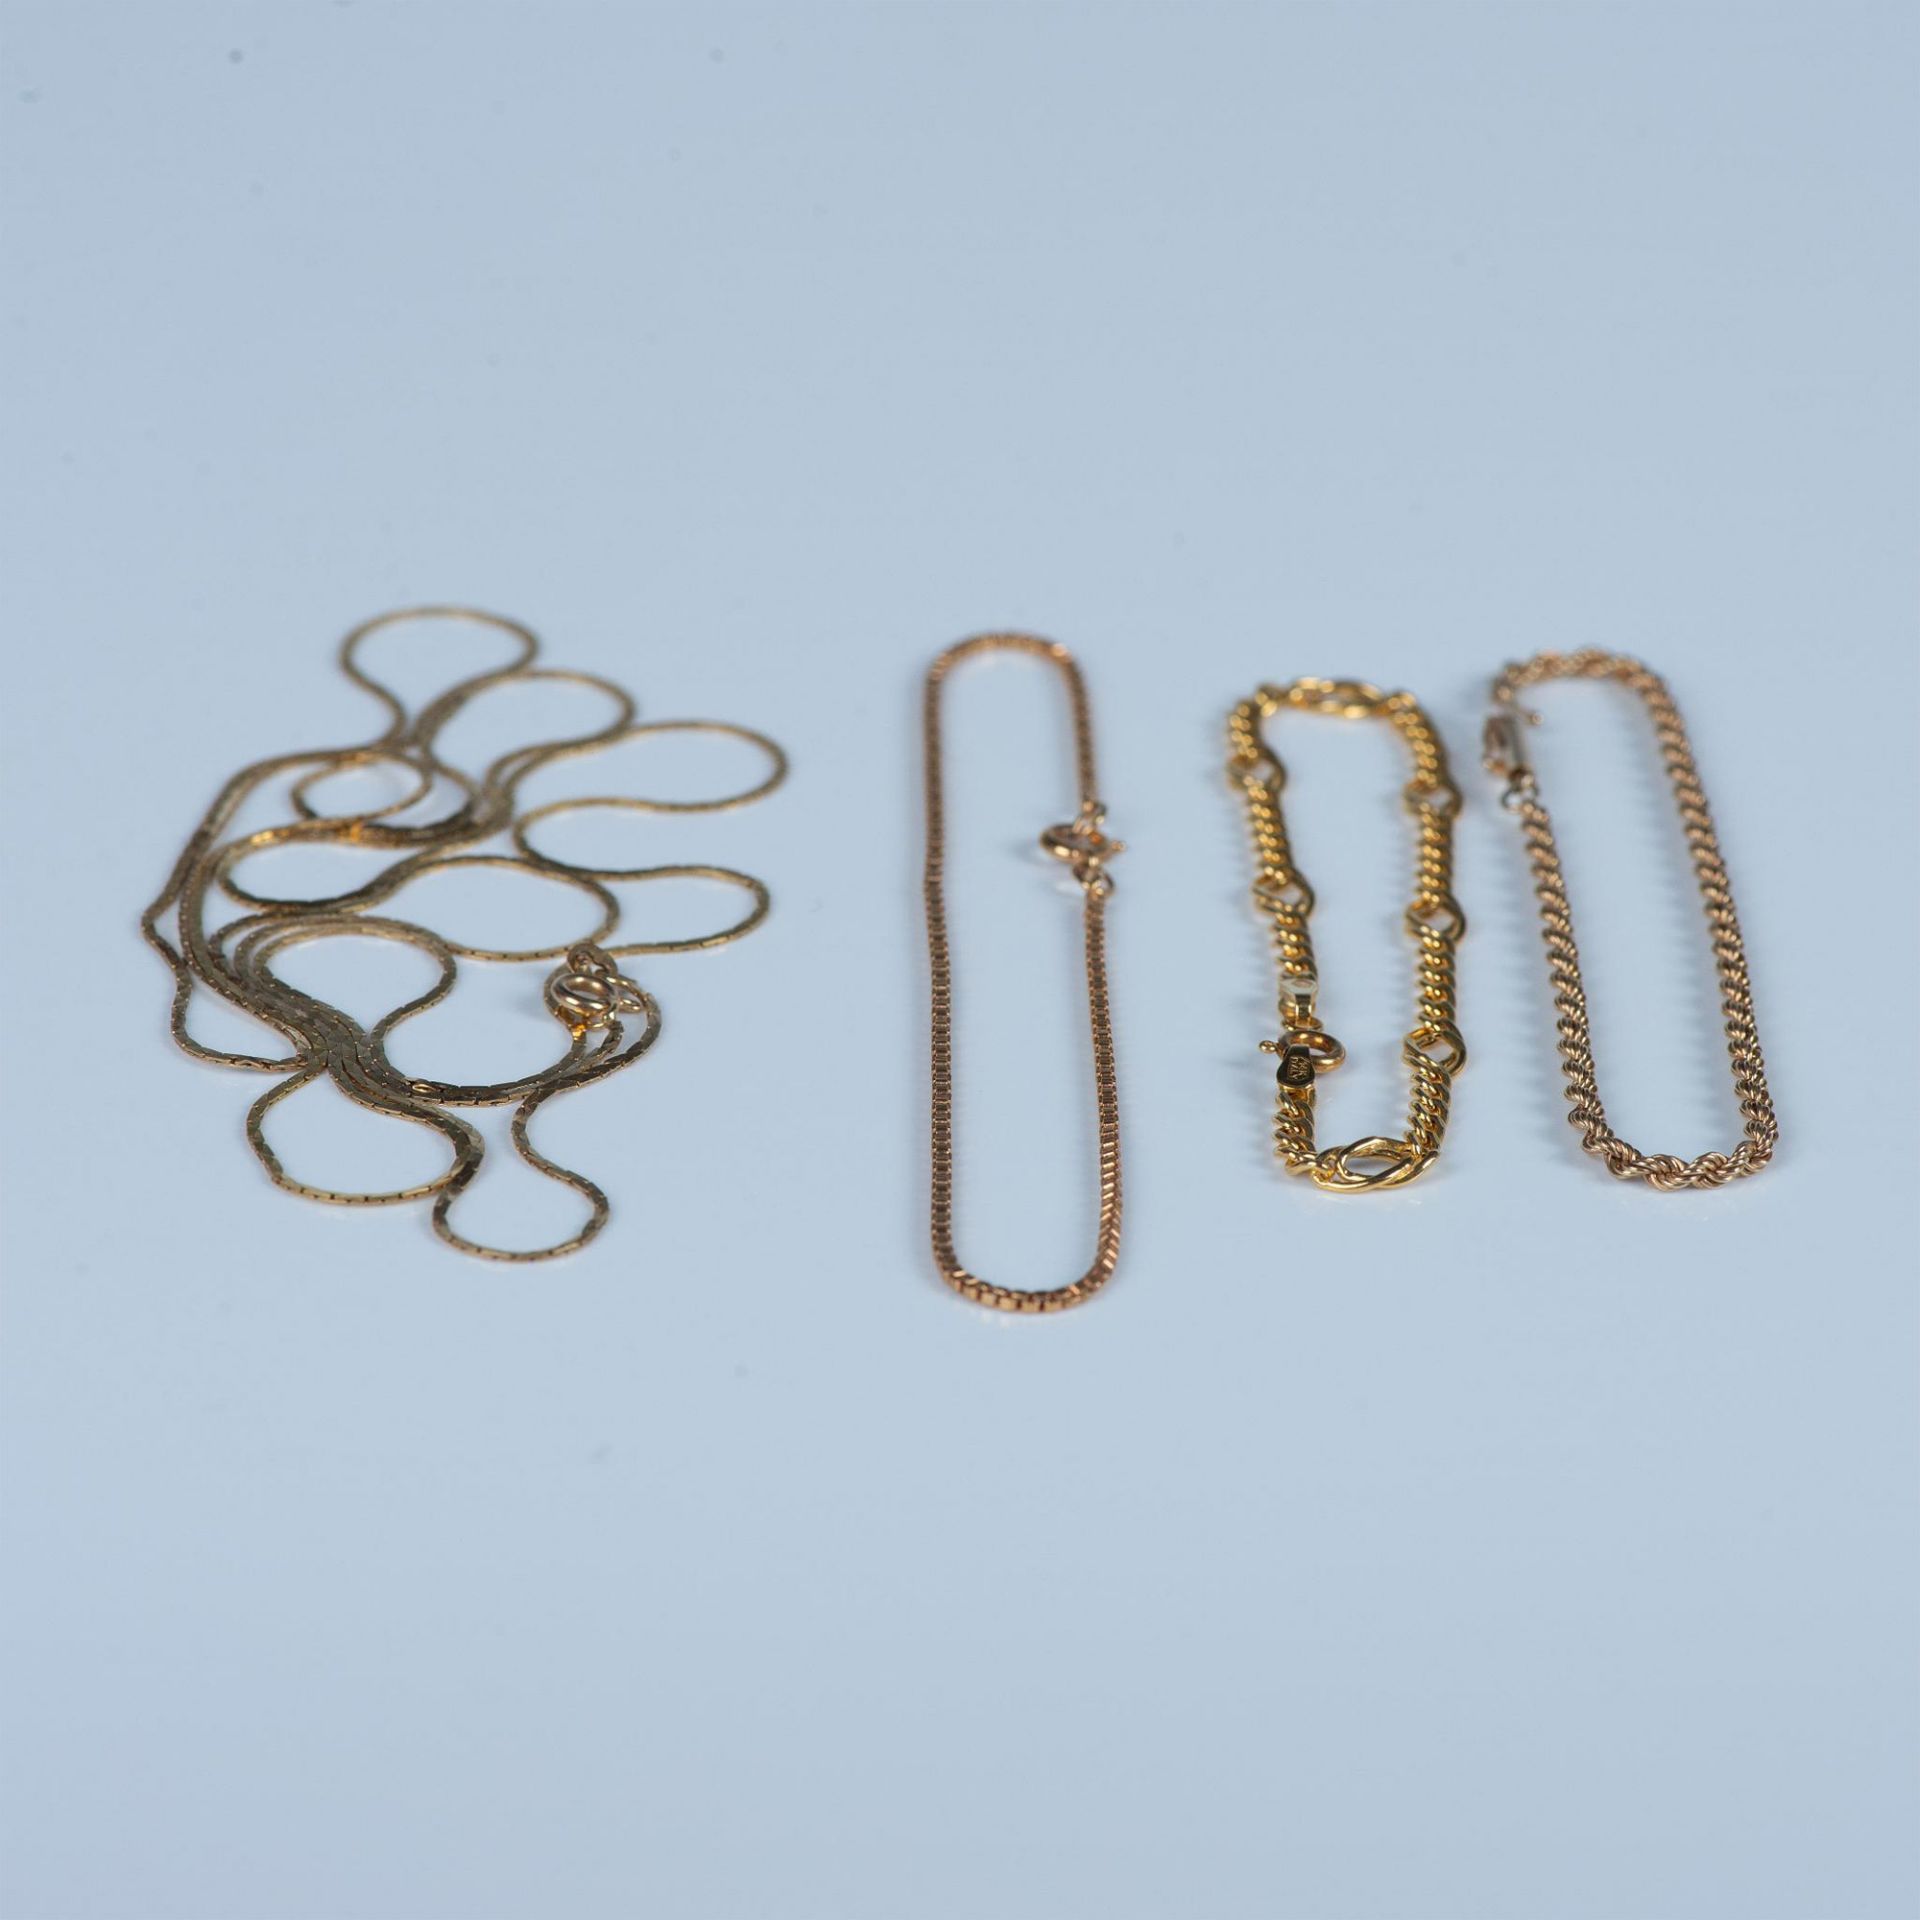 4pc Gold Necklace and Bracelets - Image 2 of 6